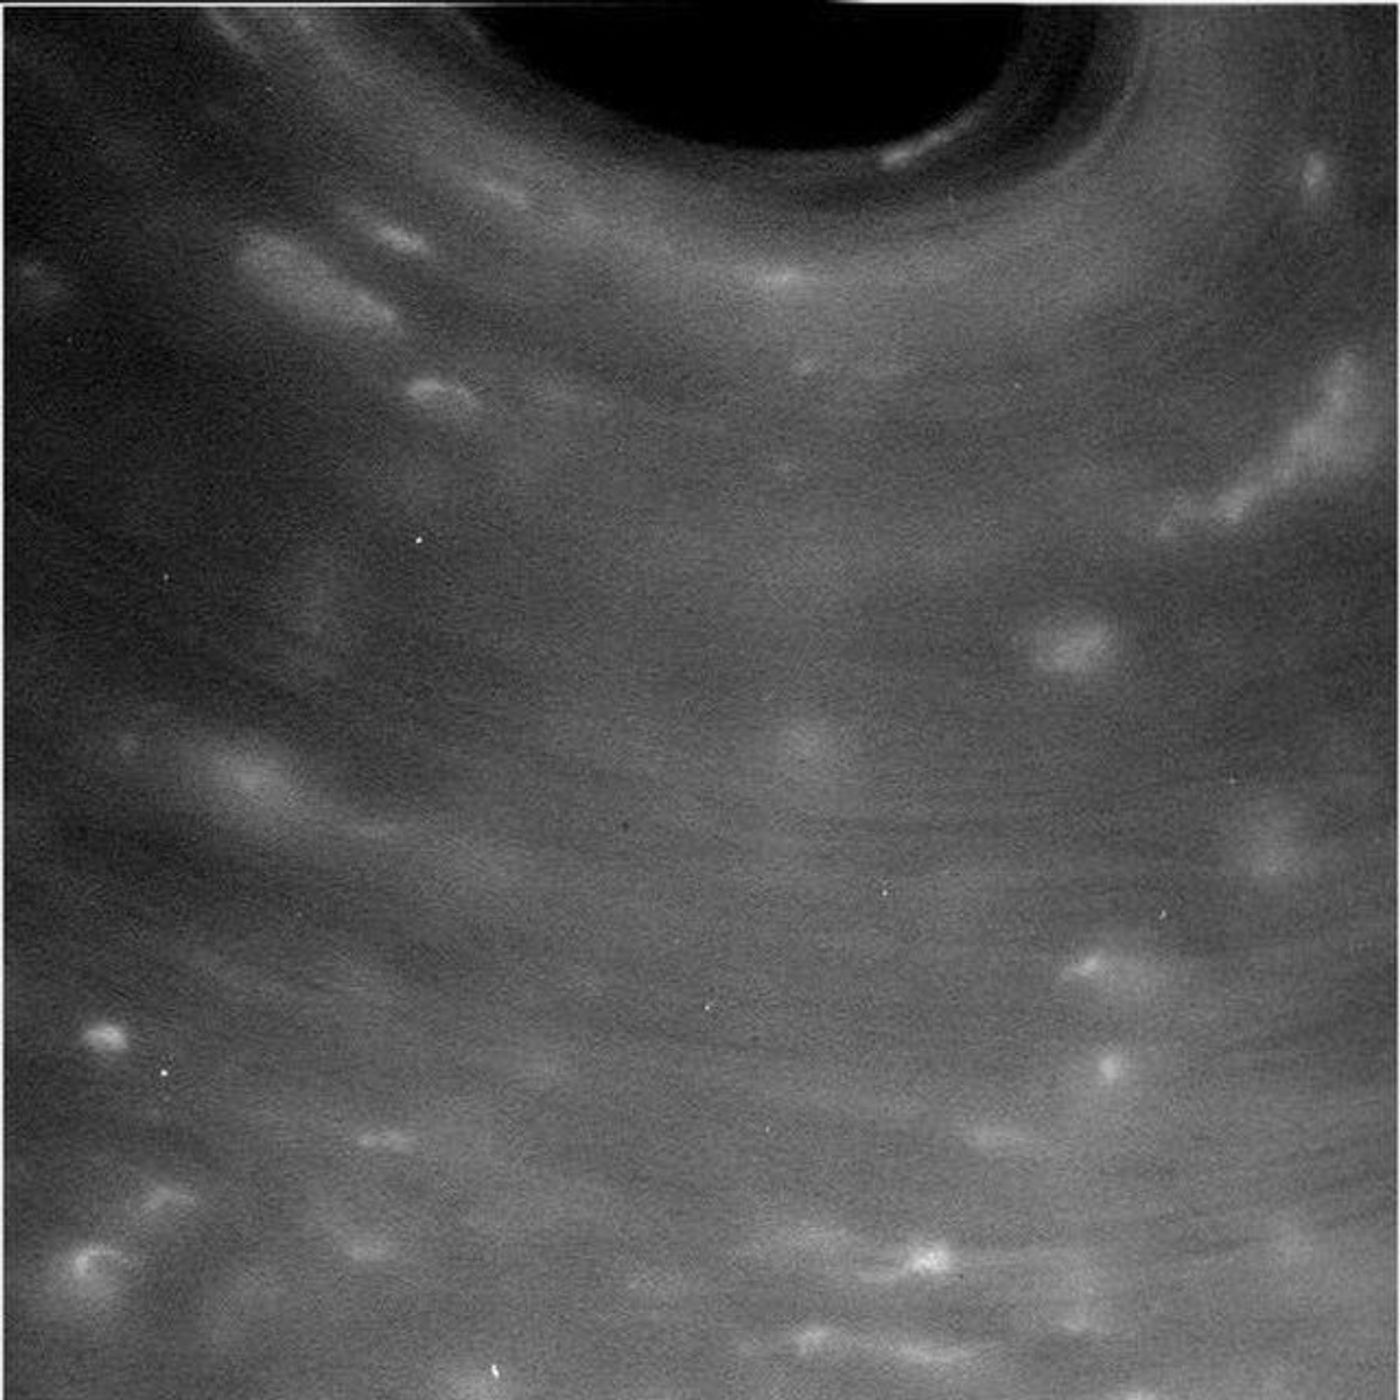 Saturn's atmosphere has lots of detailed streaks and striations that scientists hope to study at a future date.